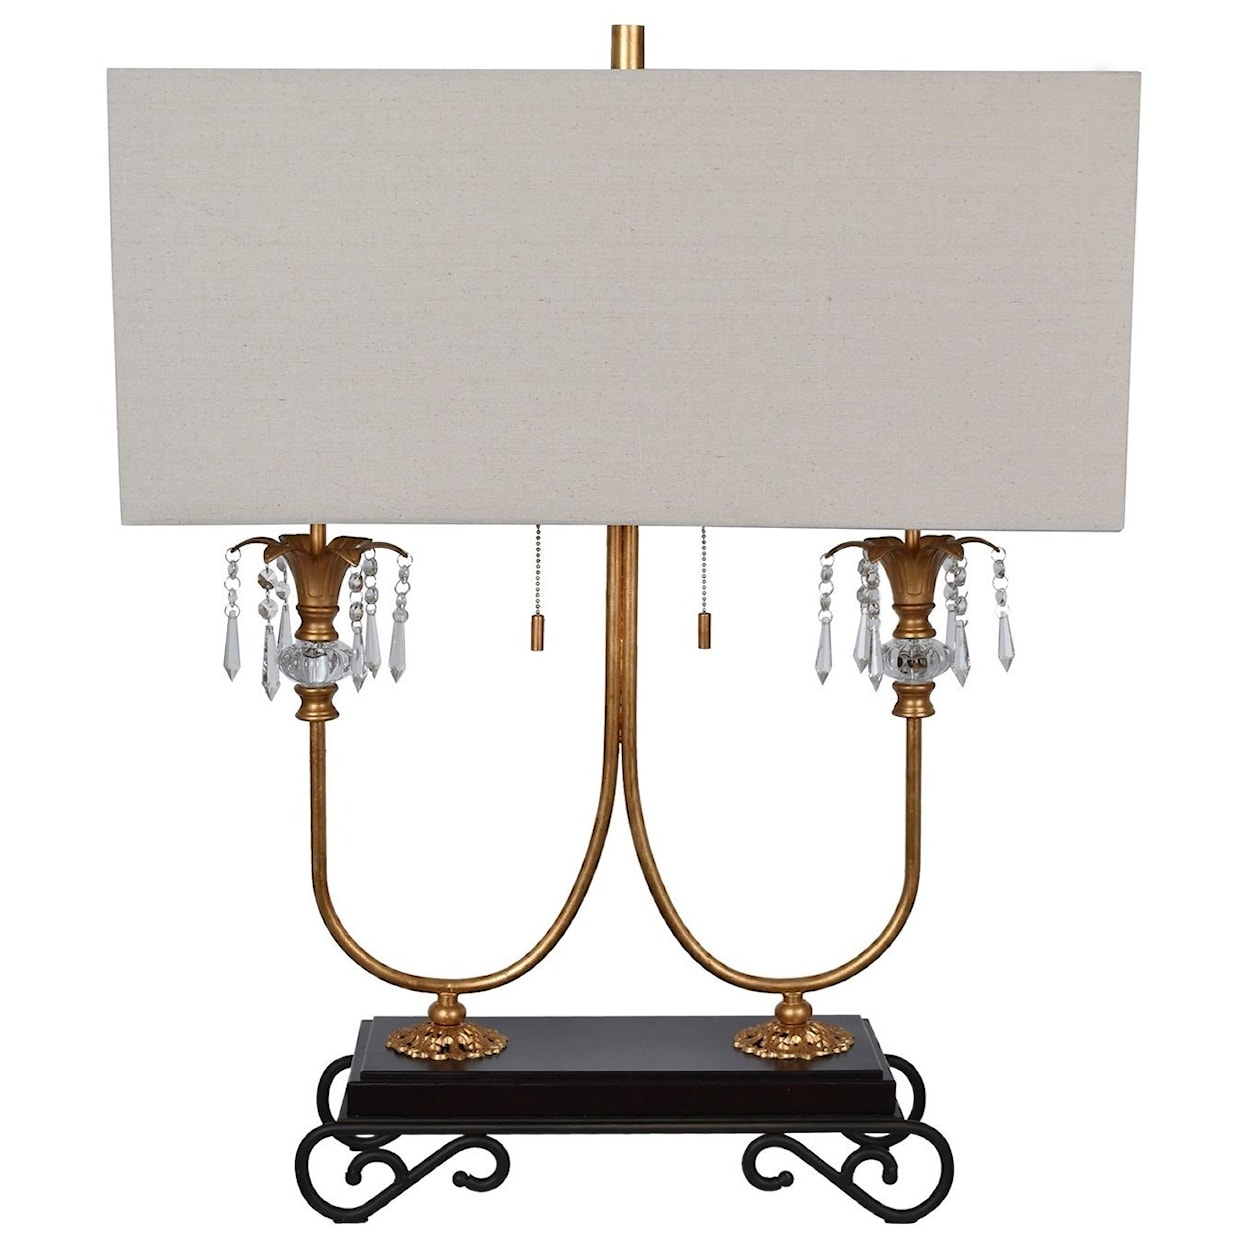 Crestview Collection Lighting Adriana Table Lamp